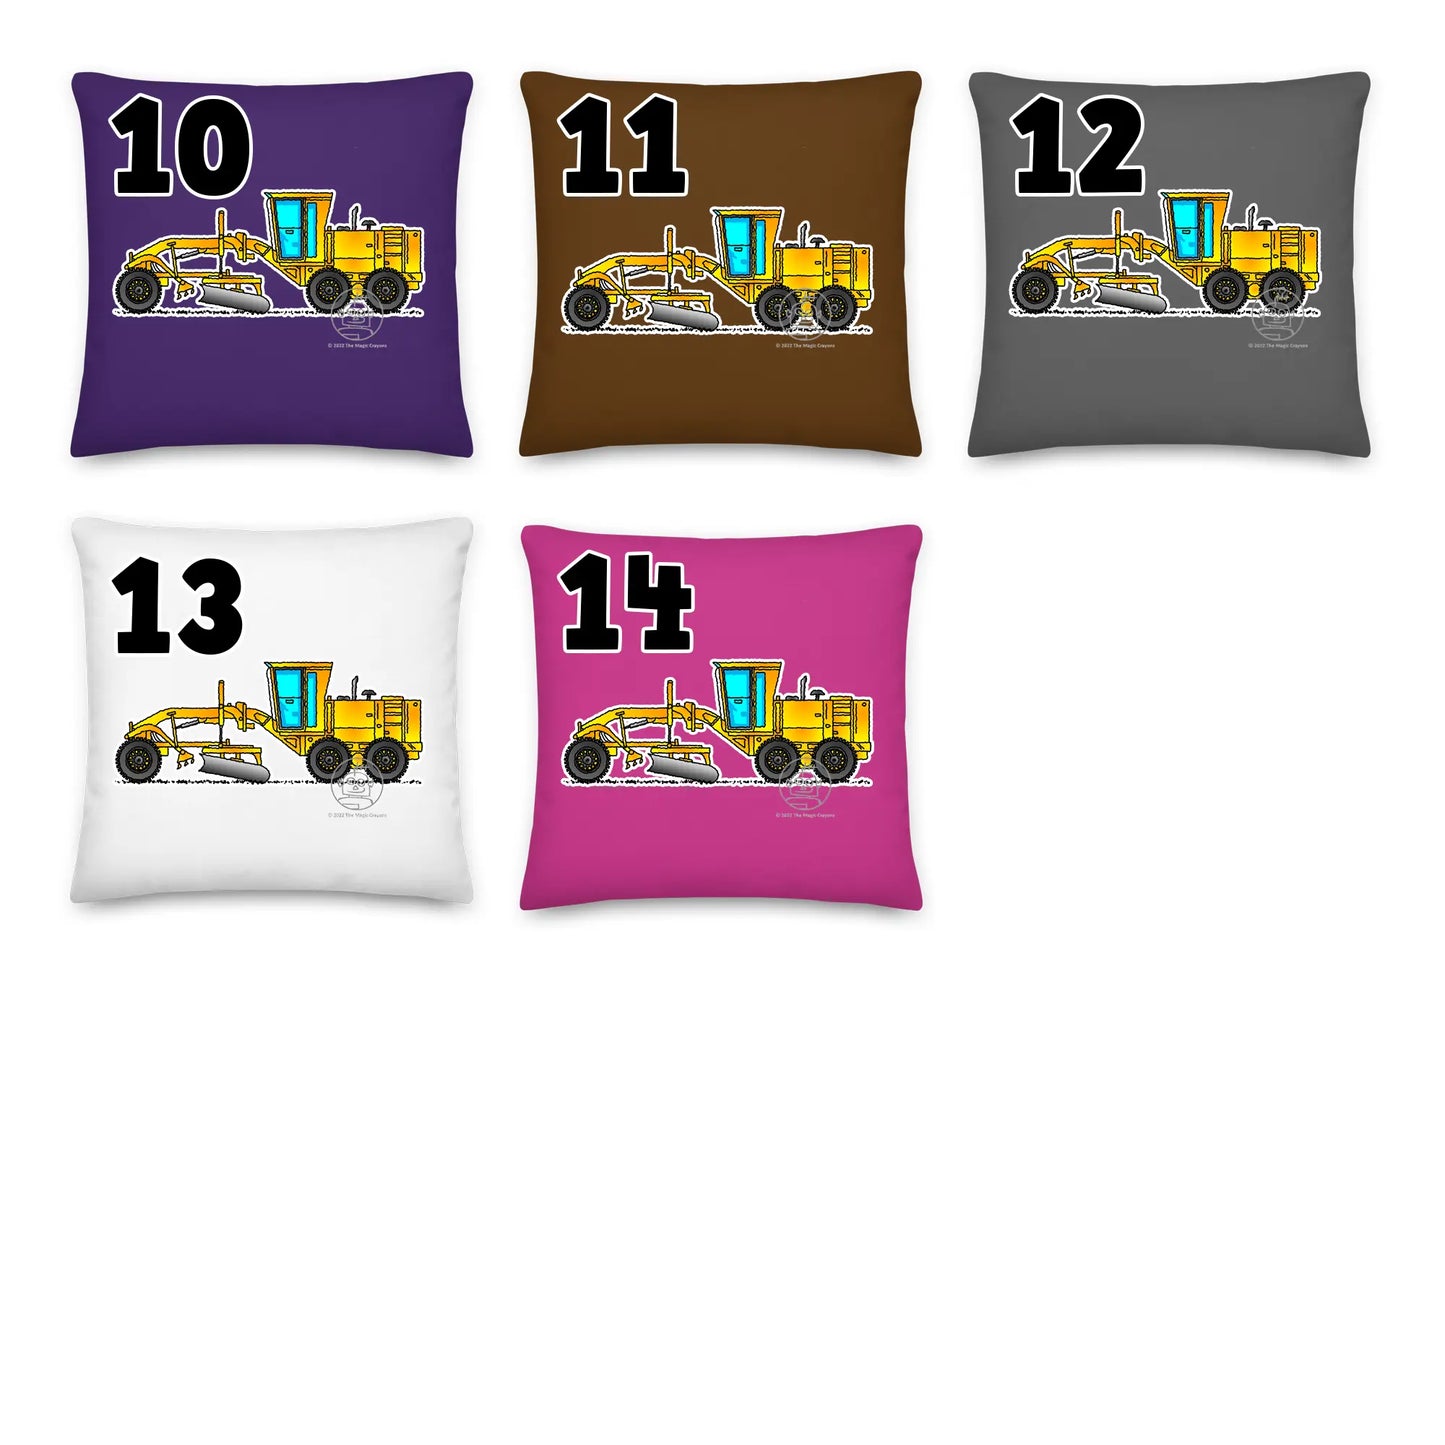 Grader Pillow Cushion, Personalized P007